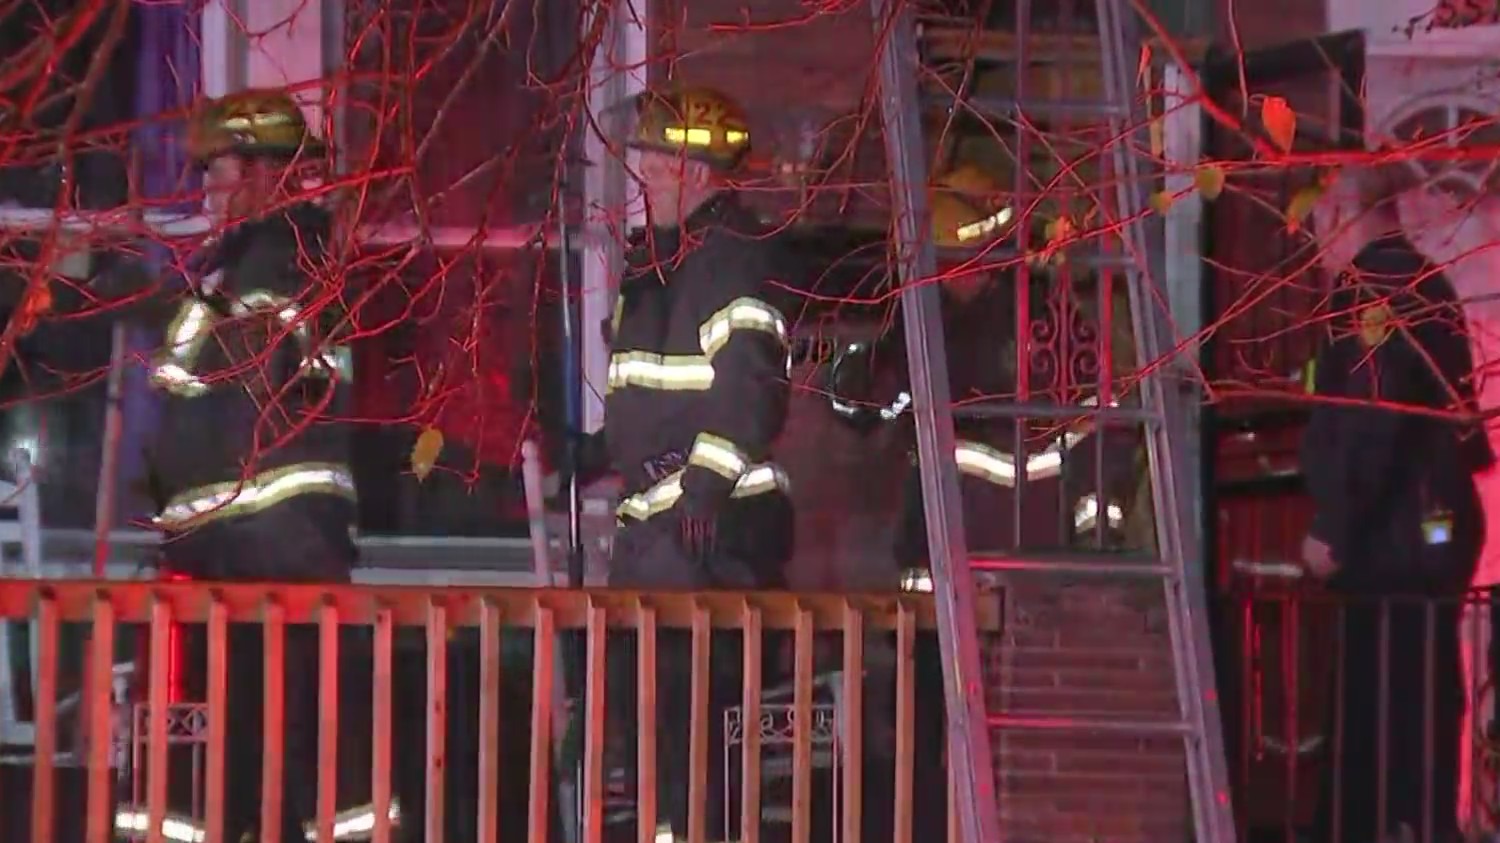 House Fire In Philadelphia's Olney Section Leaves Several People Displaced